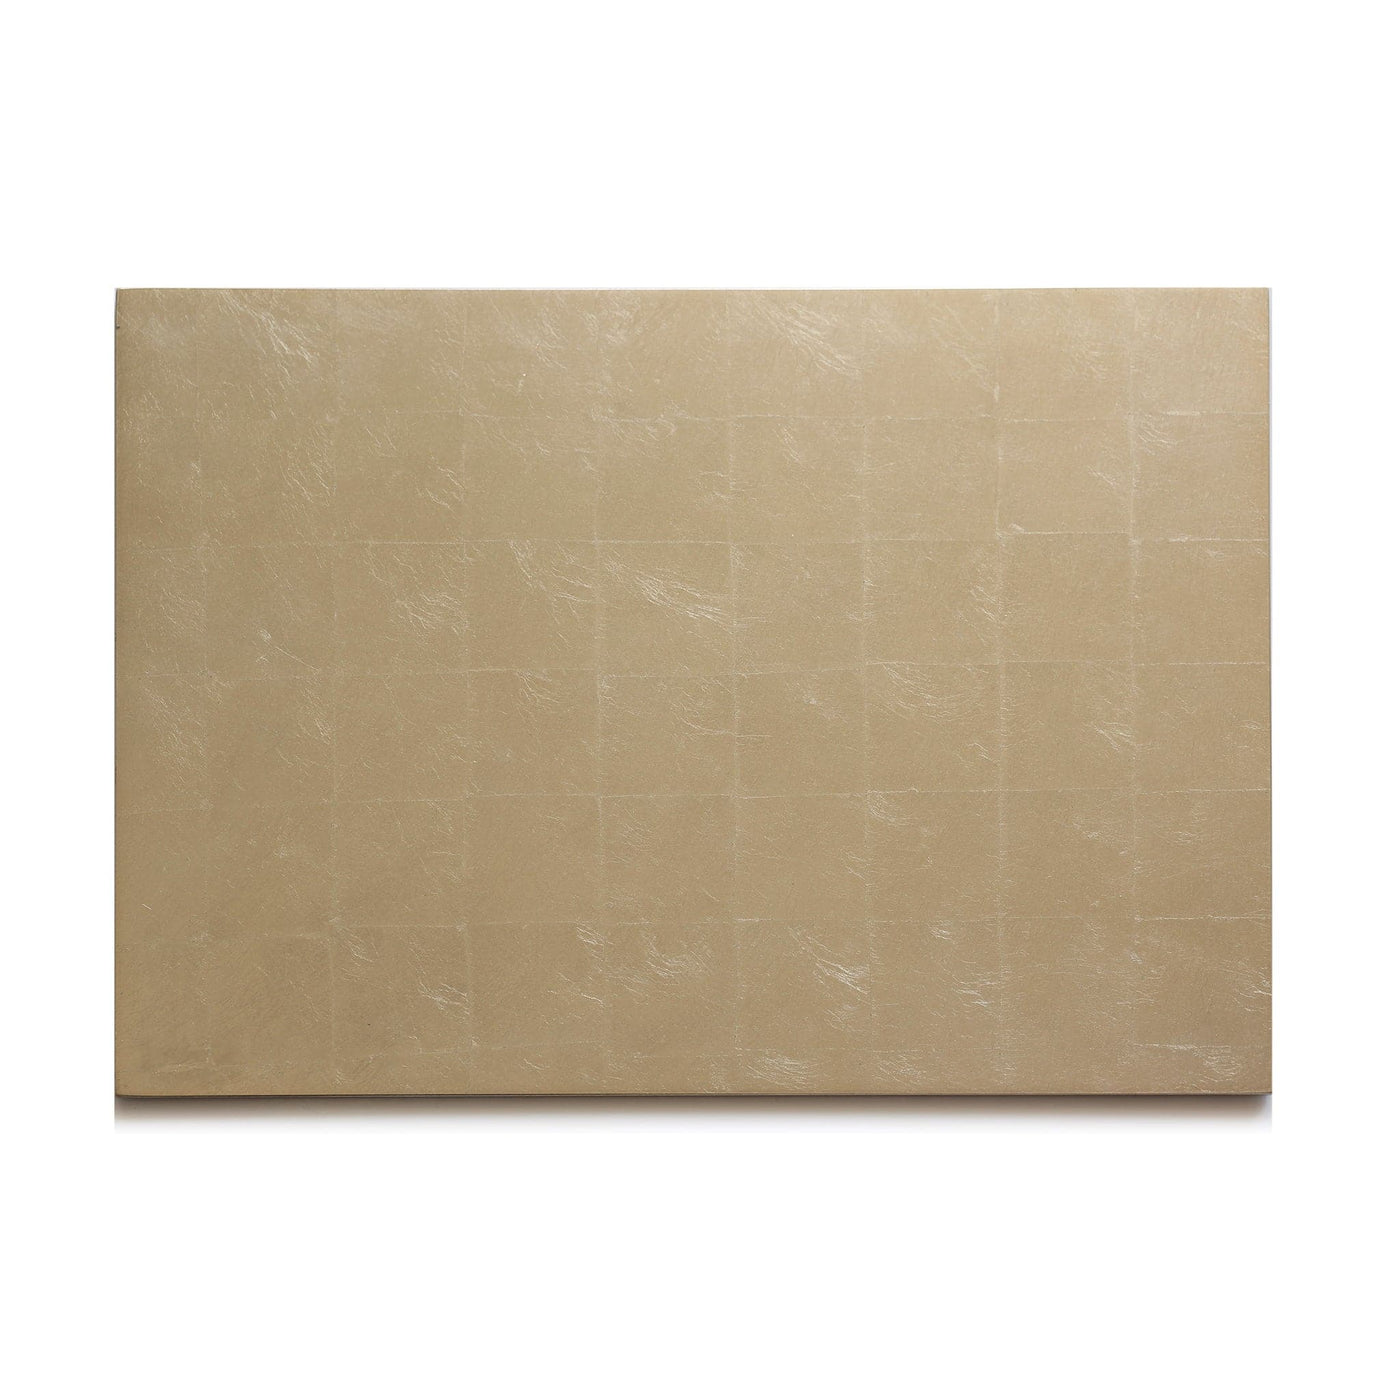 Silver Leaf Chic Matte Serving Mat/ Grand Placemat Champagne - Posh Trading Company  - Interior furnishings london